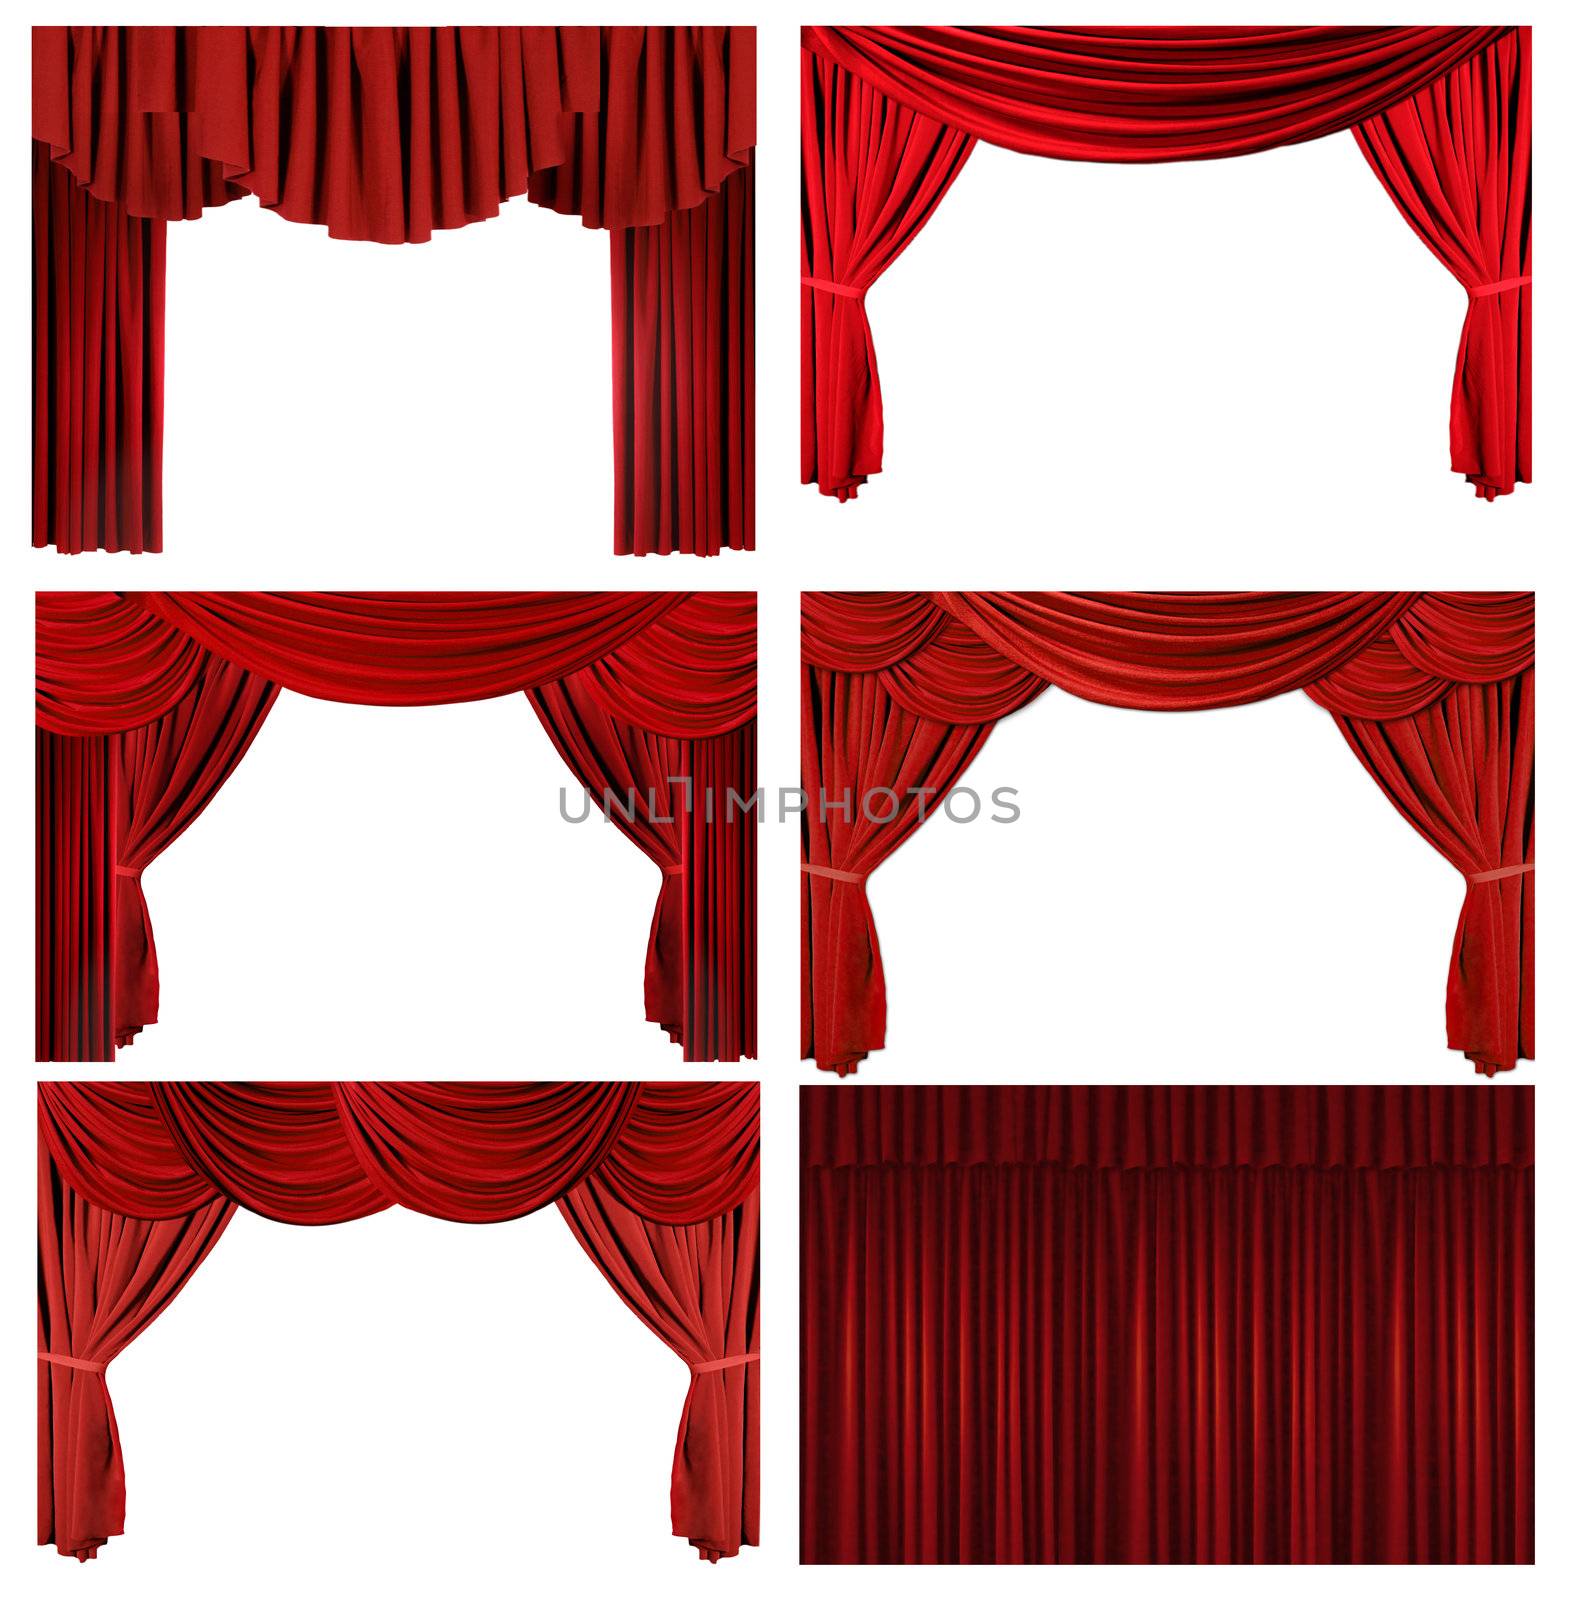 Dramatic red old fashioned elegant theater stage elements by tobkatrina